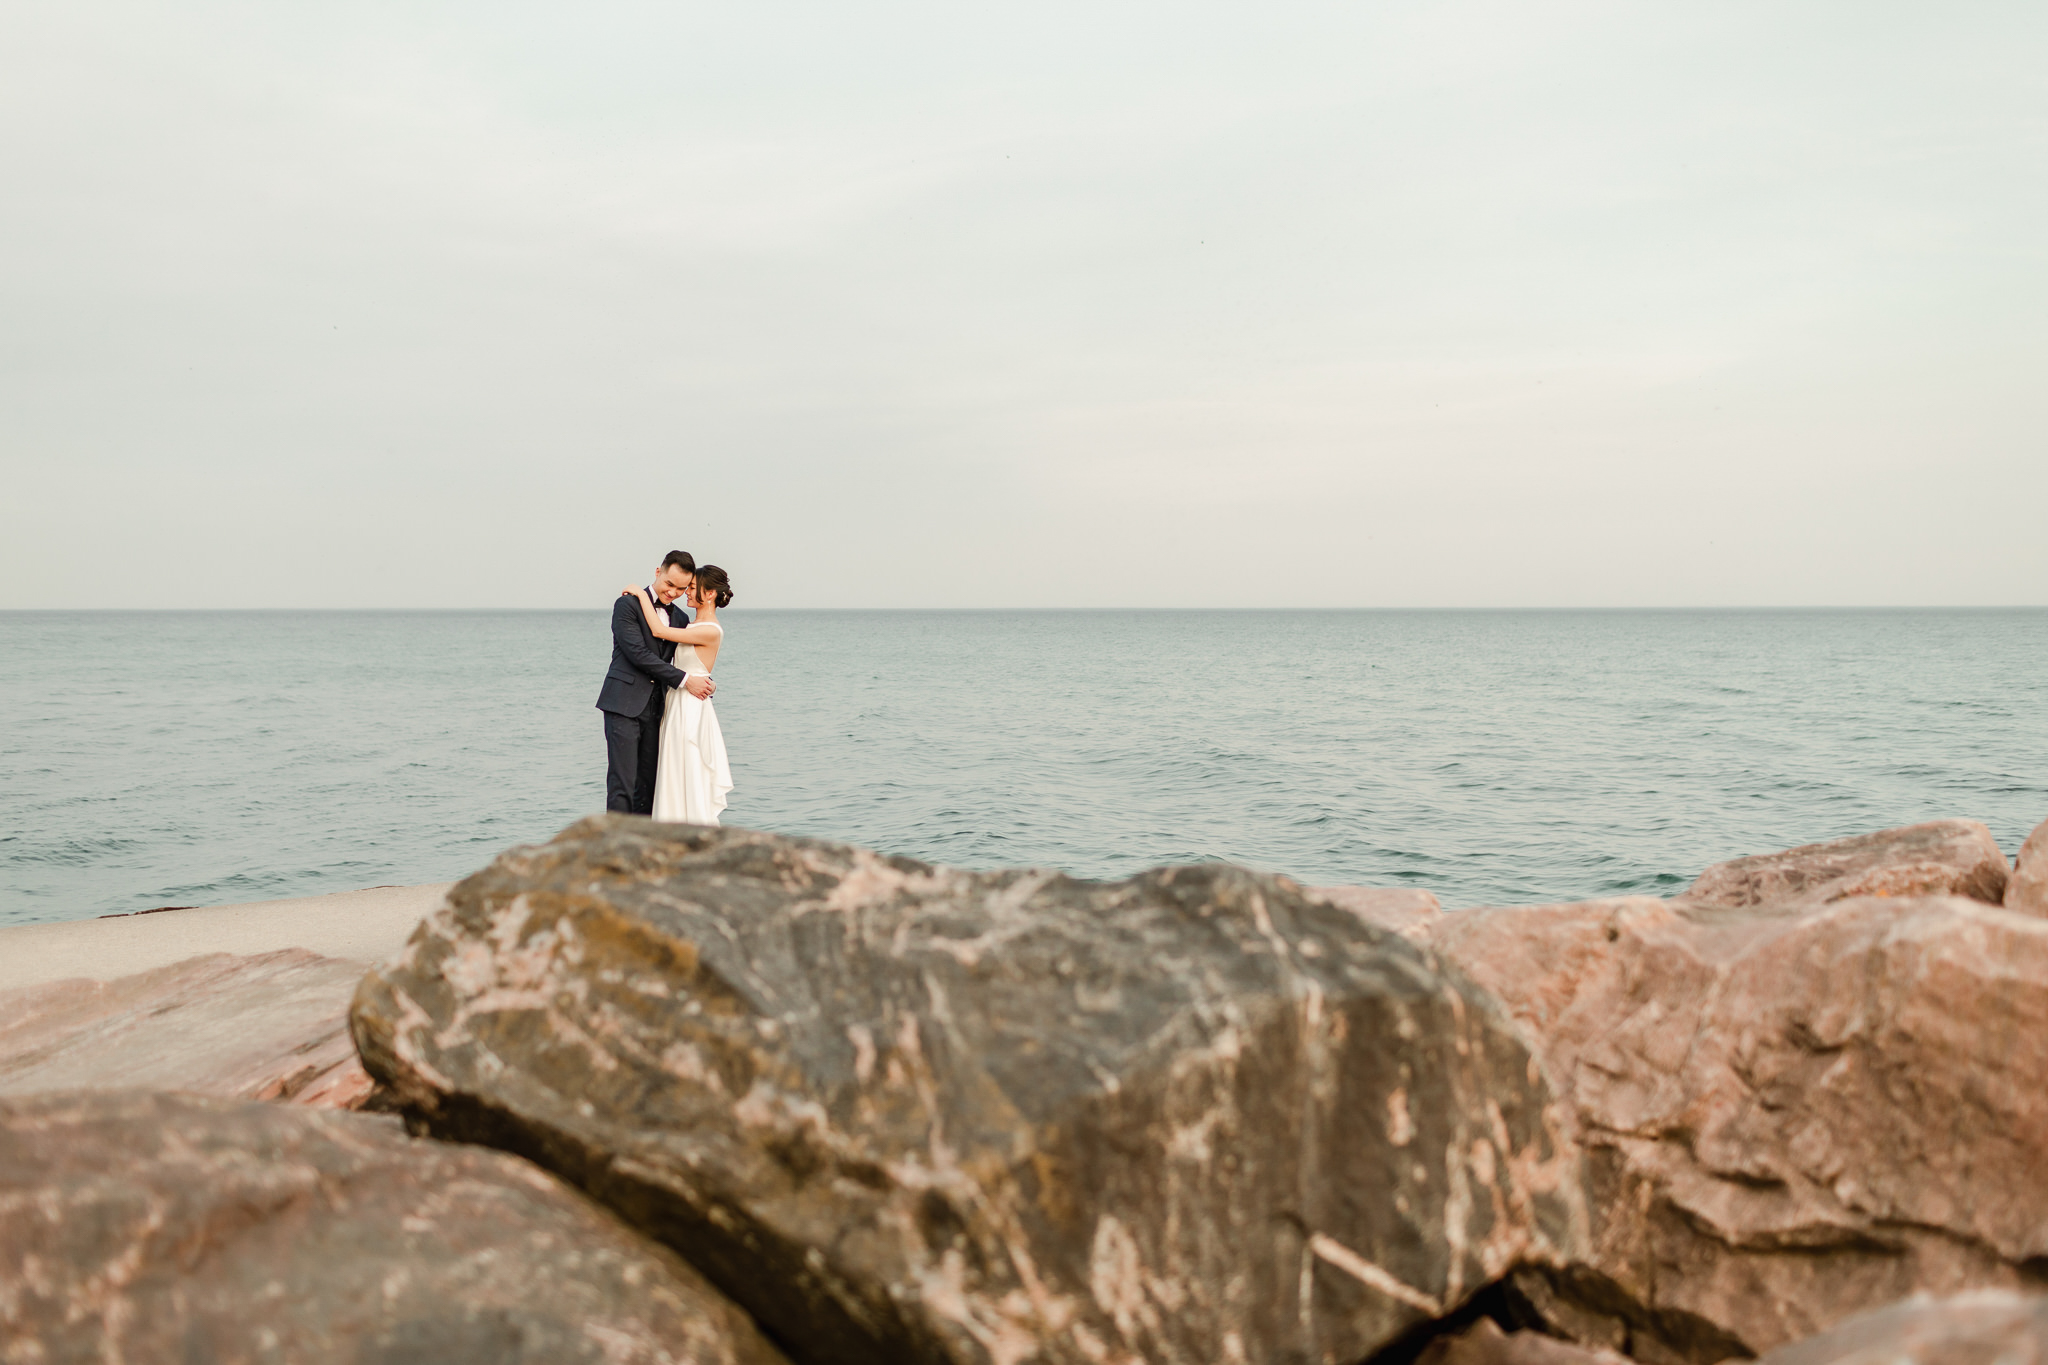 Wedding photographer capturing a couple's engagement session pose by lakefront.